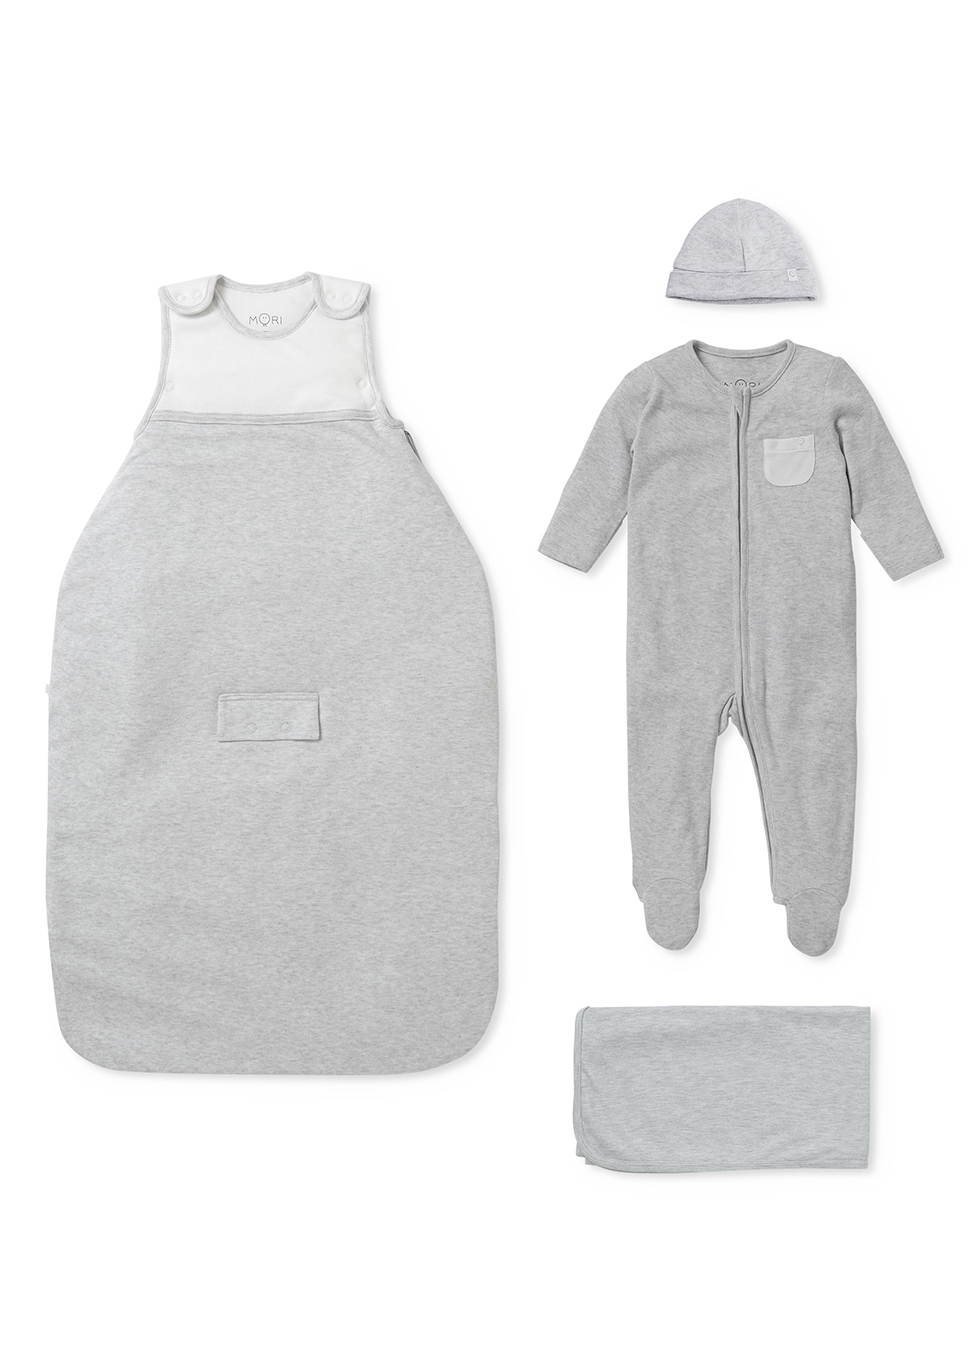 Mori Babies' Summer Clever White And Grey Jersey Sleep Set (6 Months)